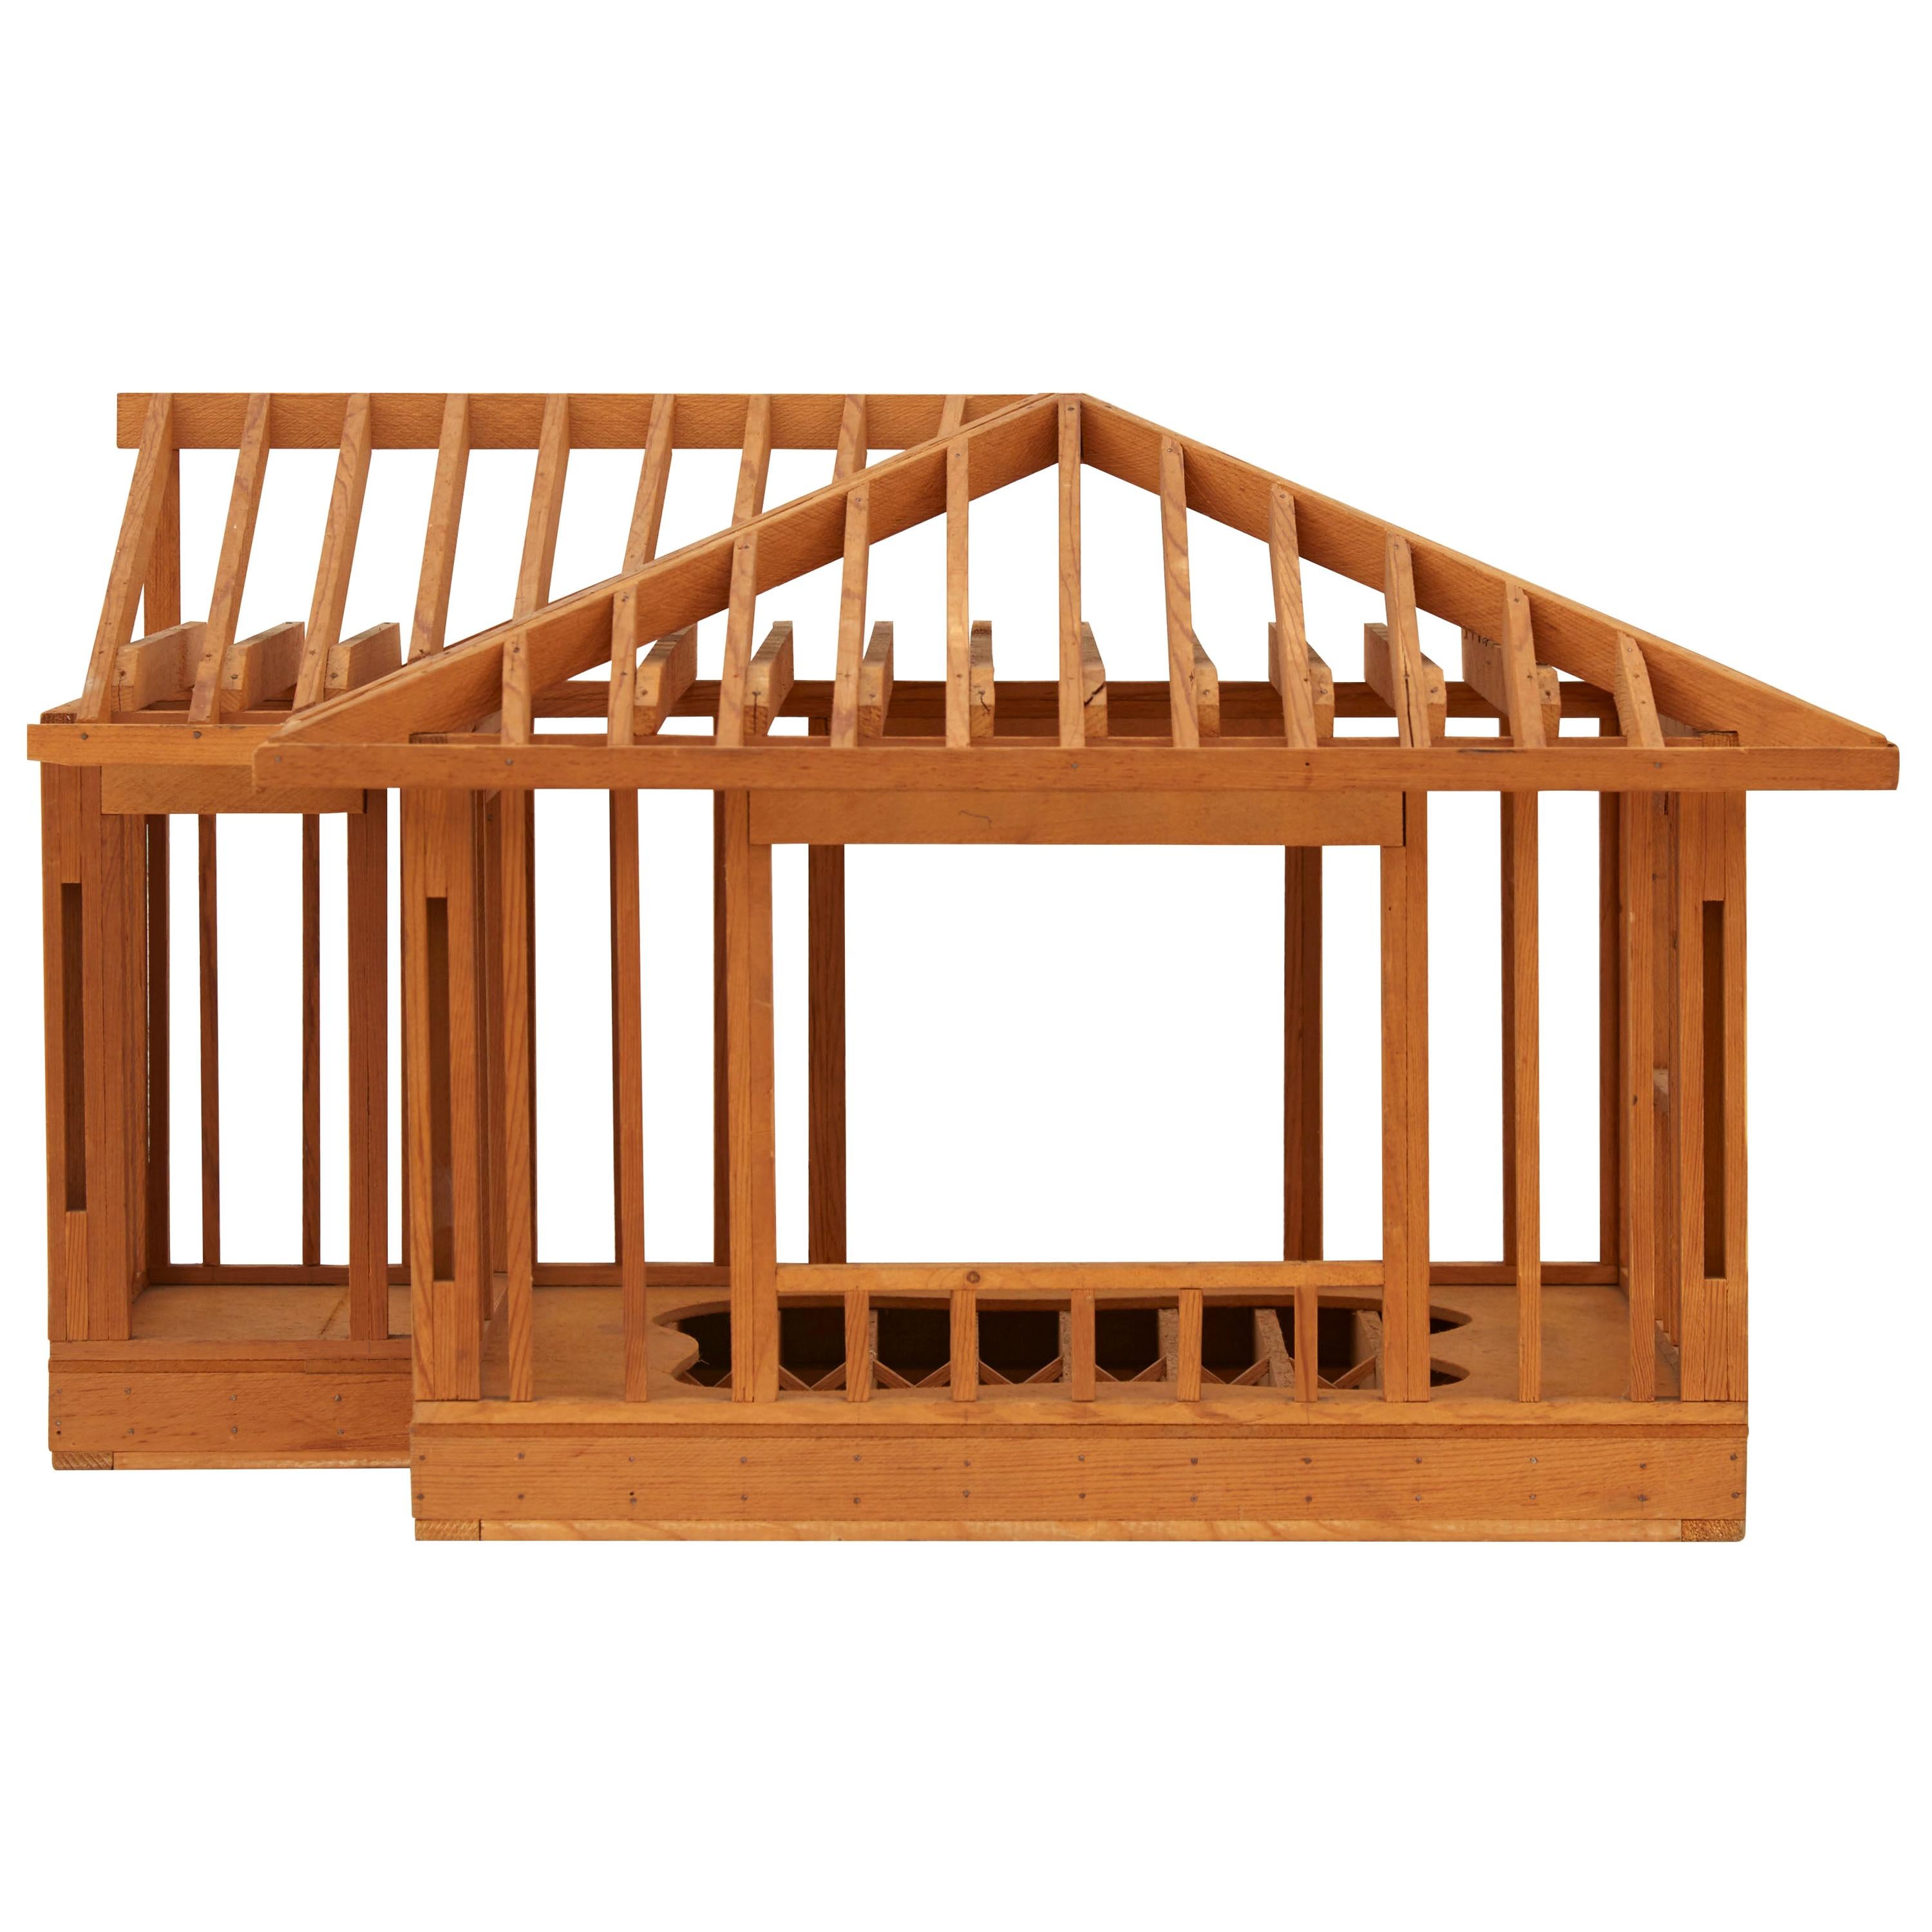 Wooden House Architectural Model